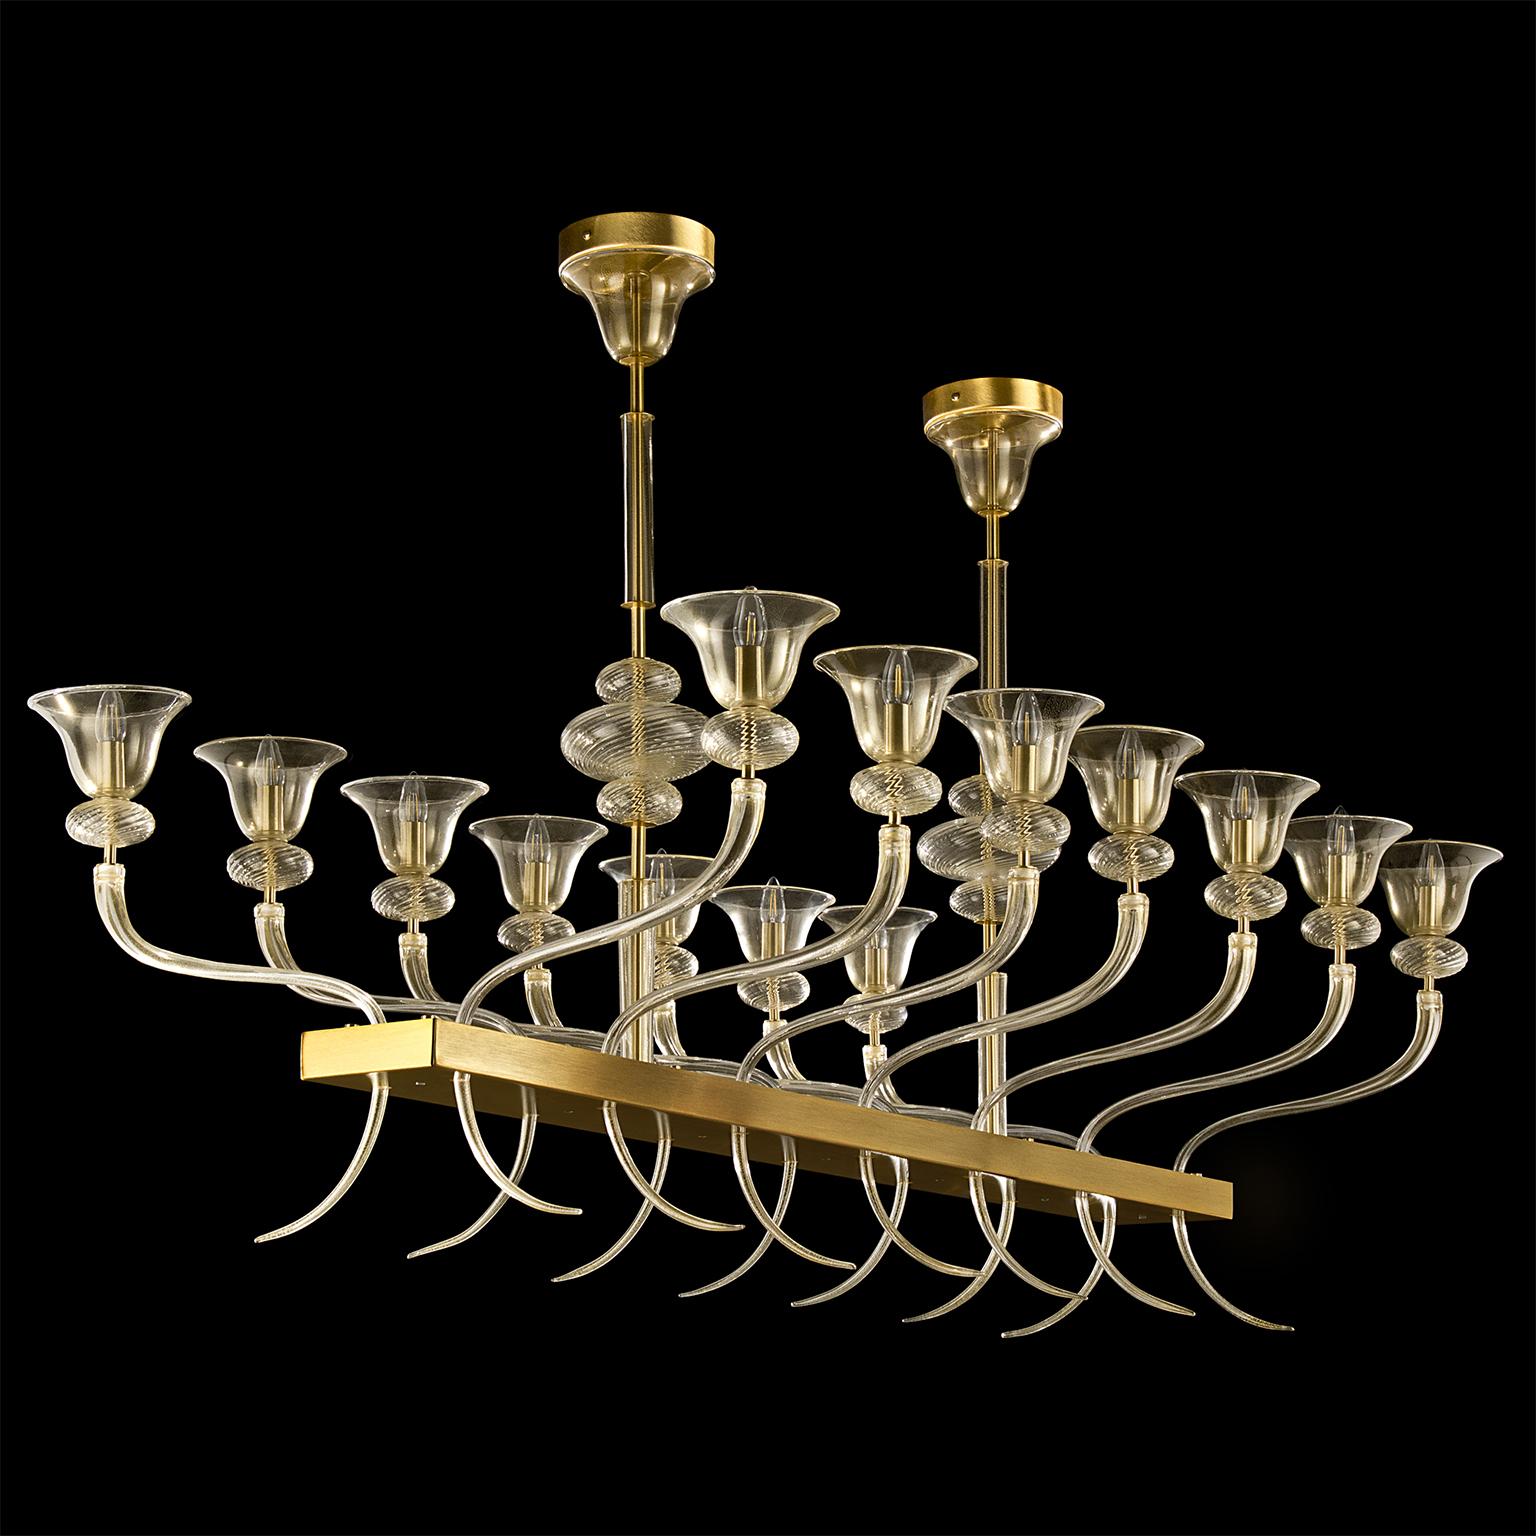 Contemporary 21st Century Chandelier 14 Arms Gold Murano Glass, Brushed Fixture by Multiforme For Sale